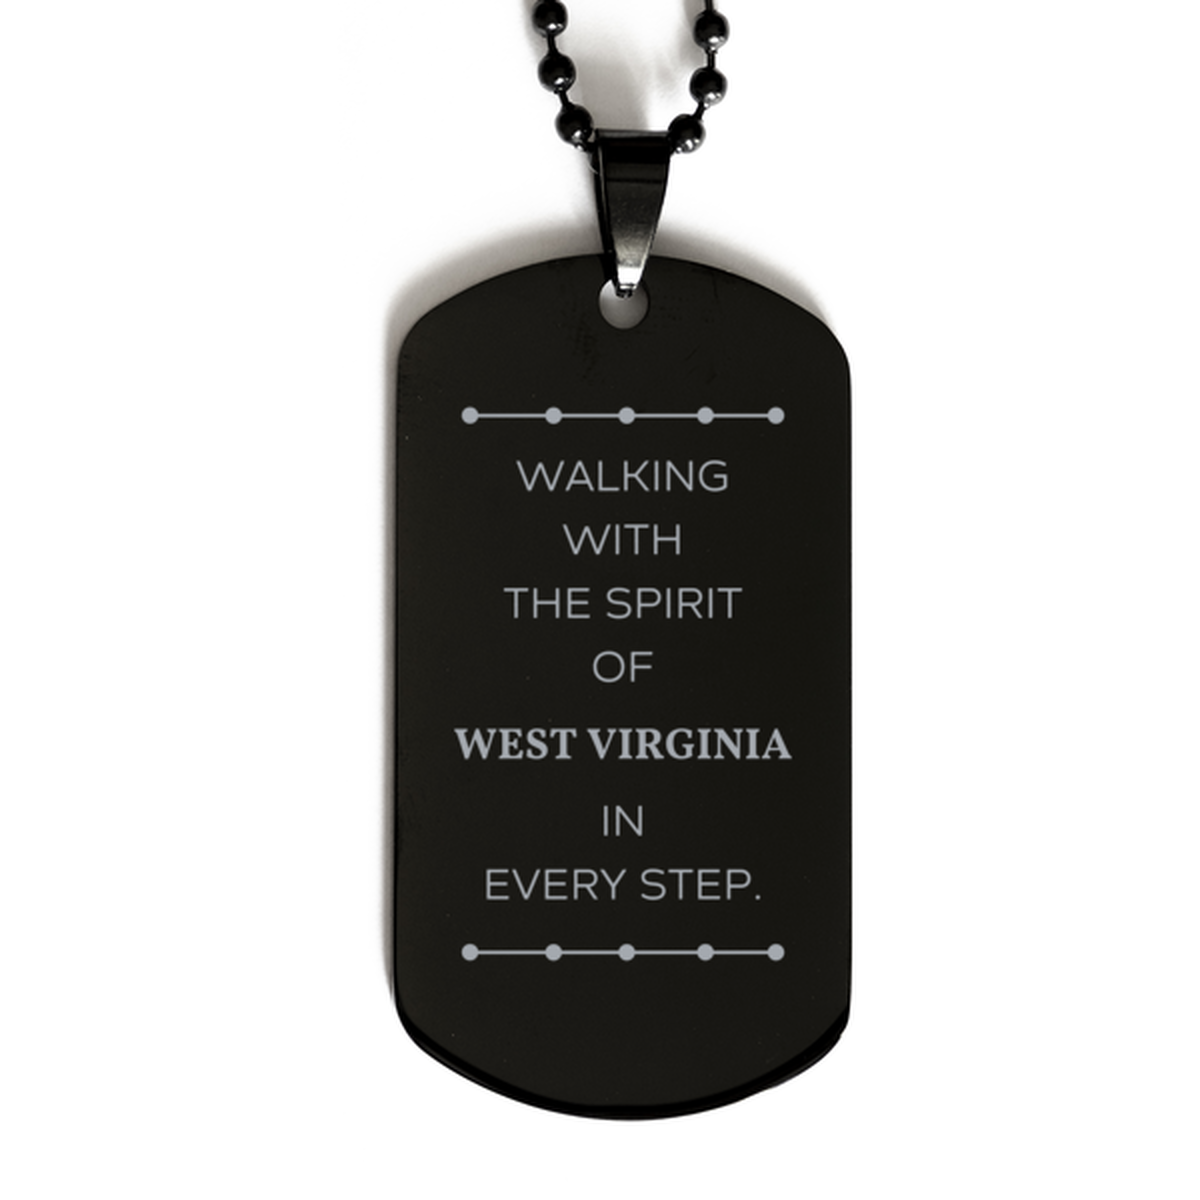 West Virginia Gifts, Walking with the spirit, Love West Virginia Birthday Christmas Black Dog Tag For West Virginia People, Men, Women, Friends